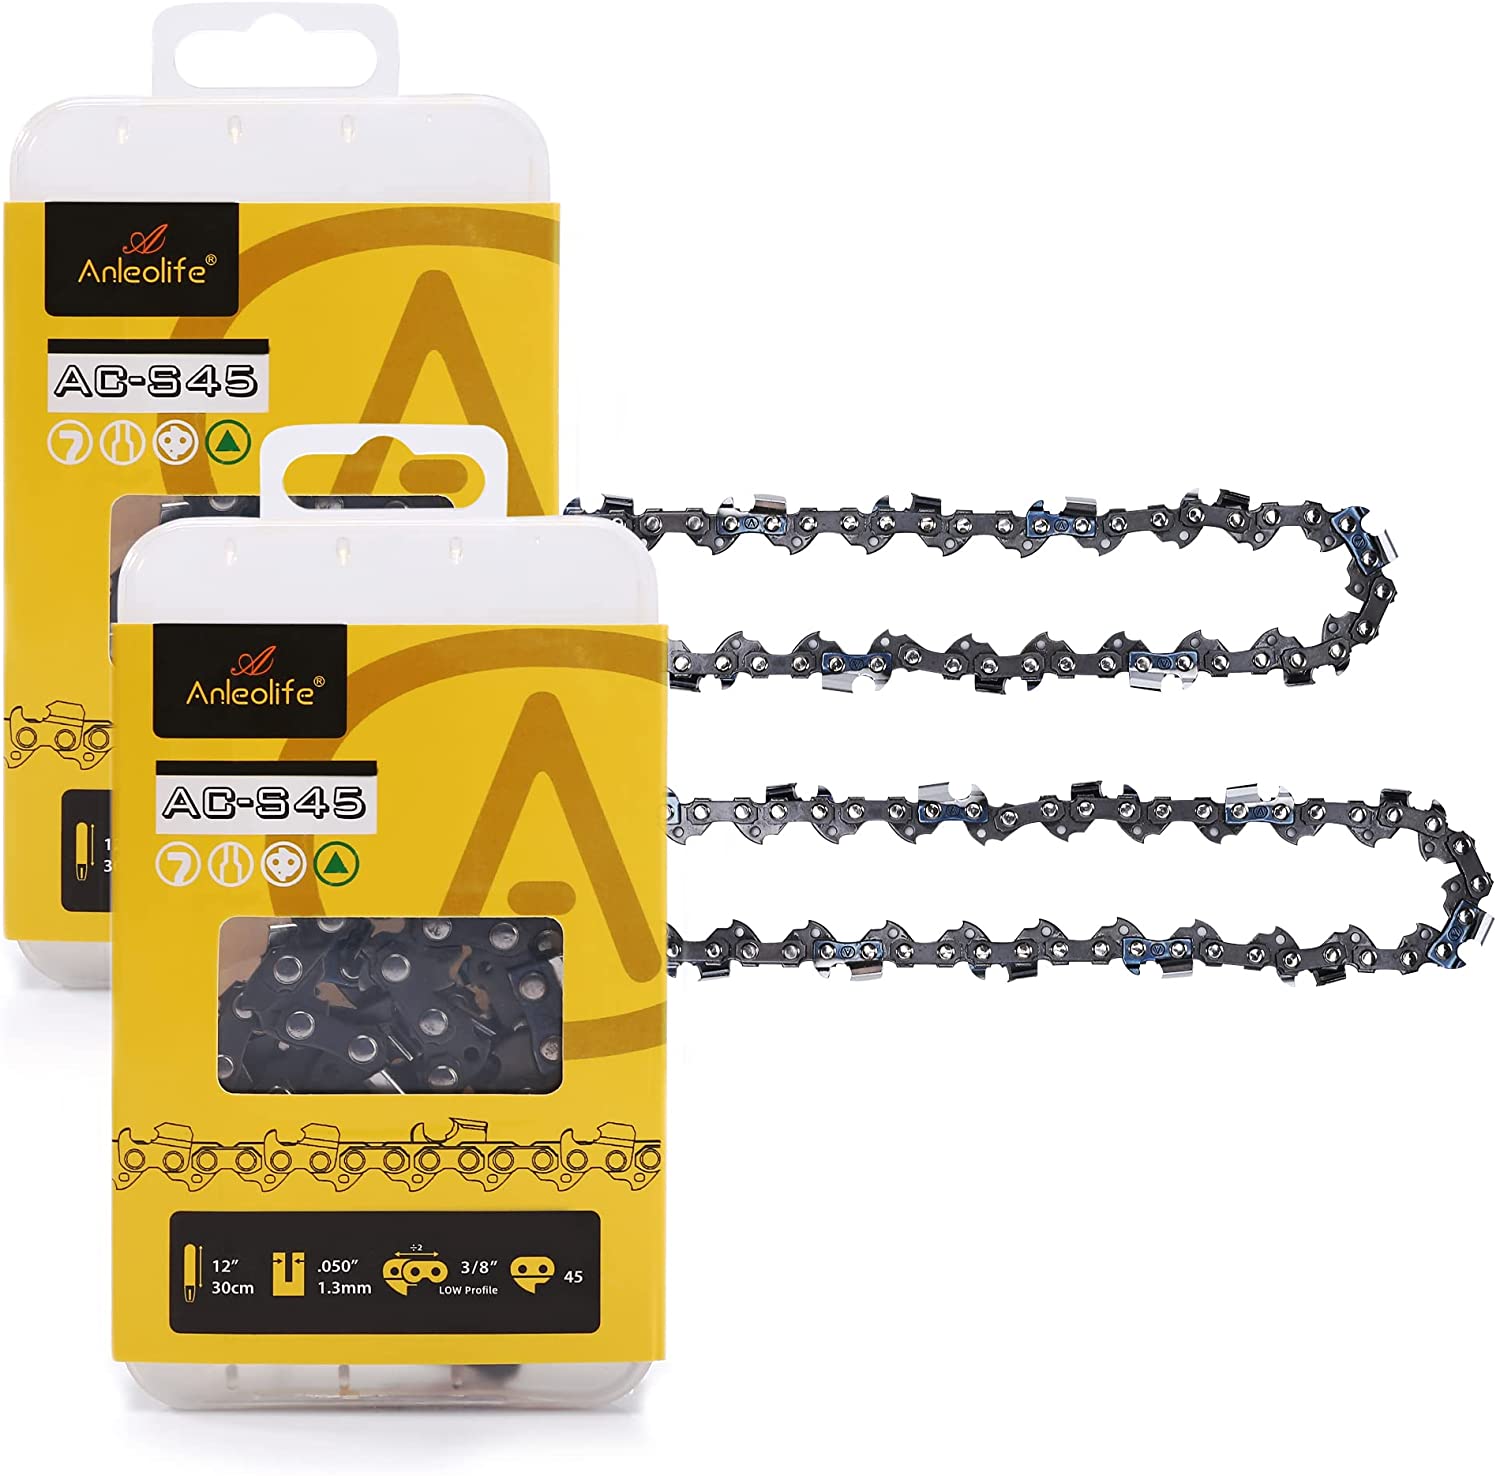 Anleolife Chainsaw Chain for 12